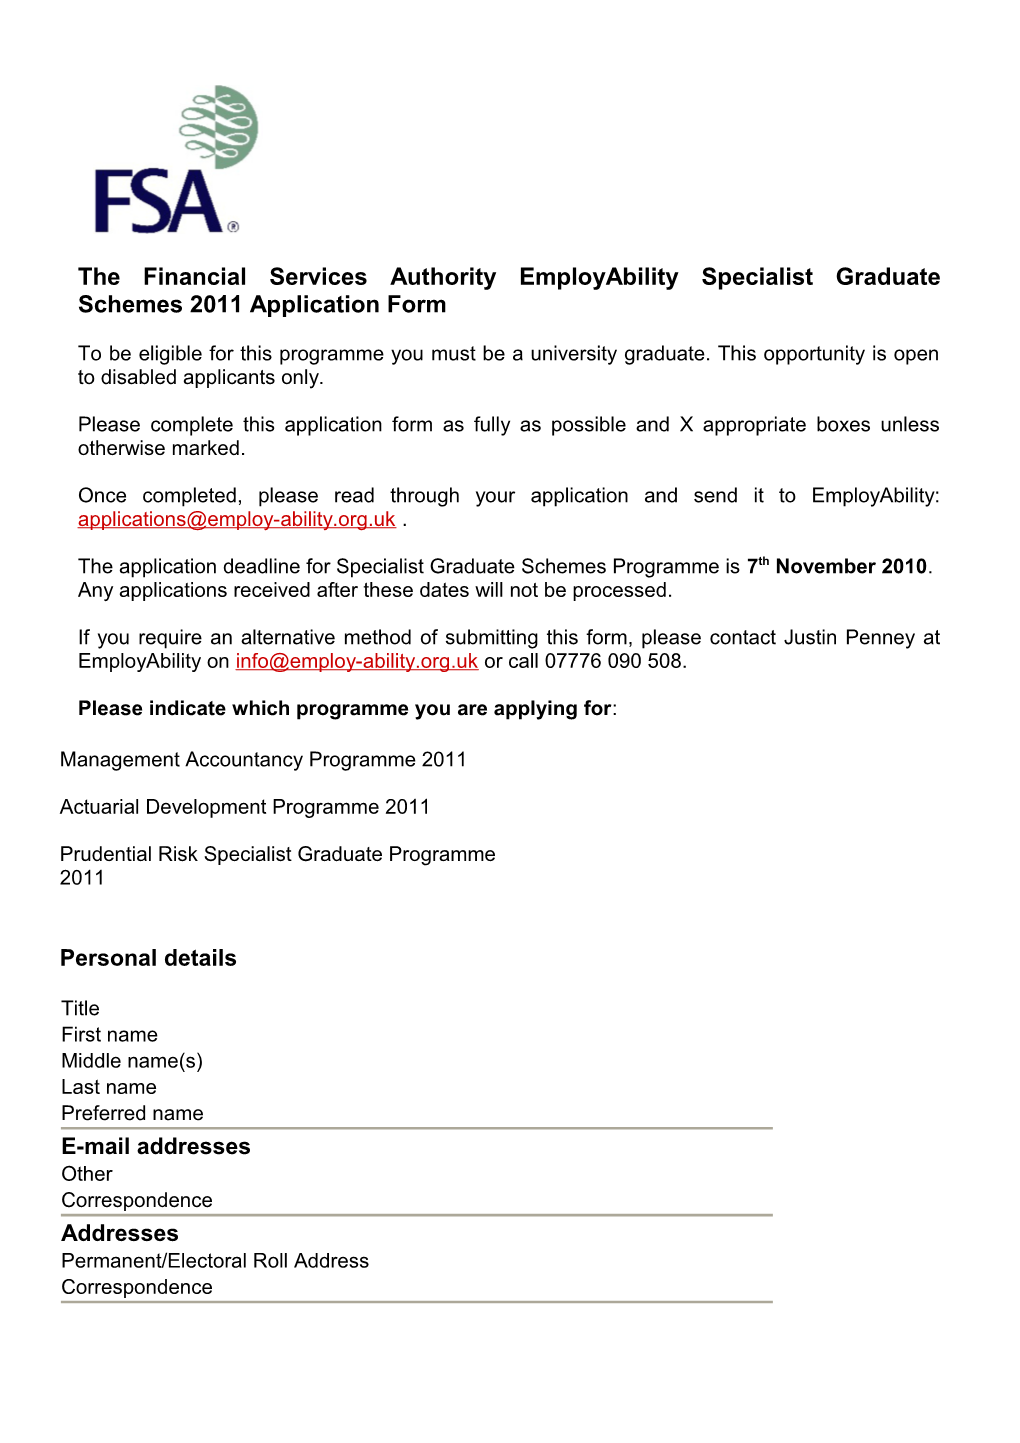 The Financial Services Authority Employability Specialist Graduate Schemes 2011 Application